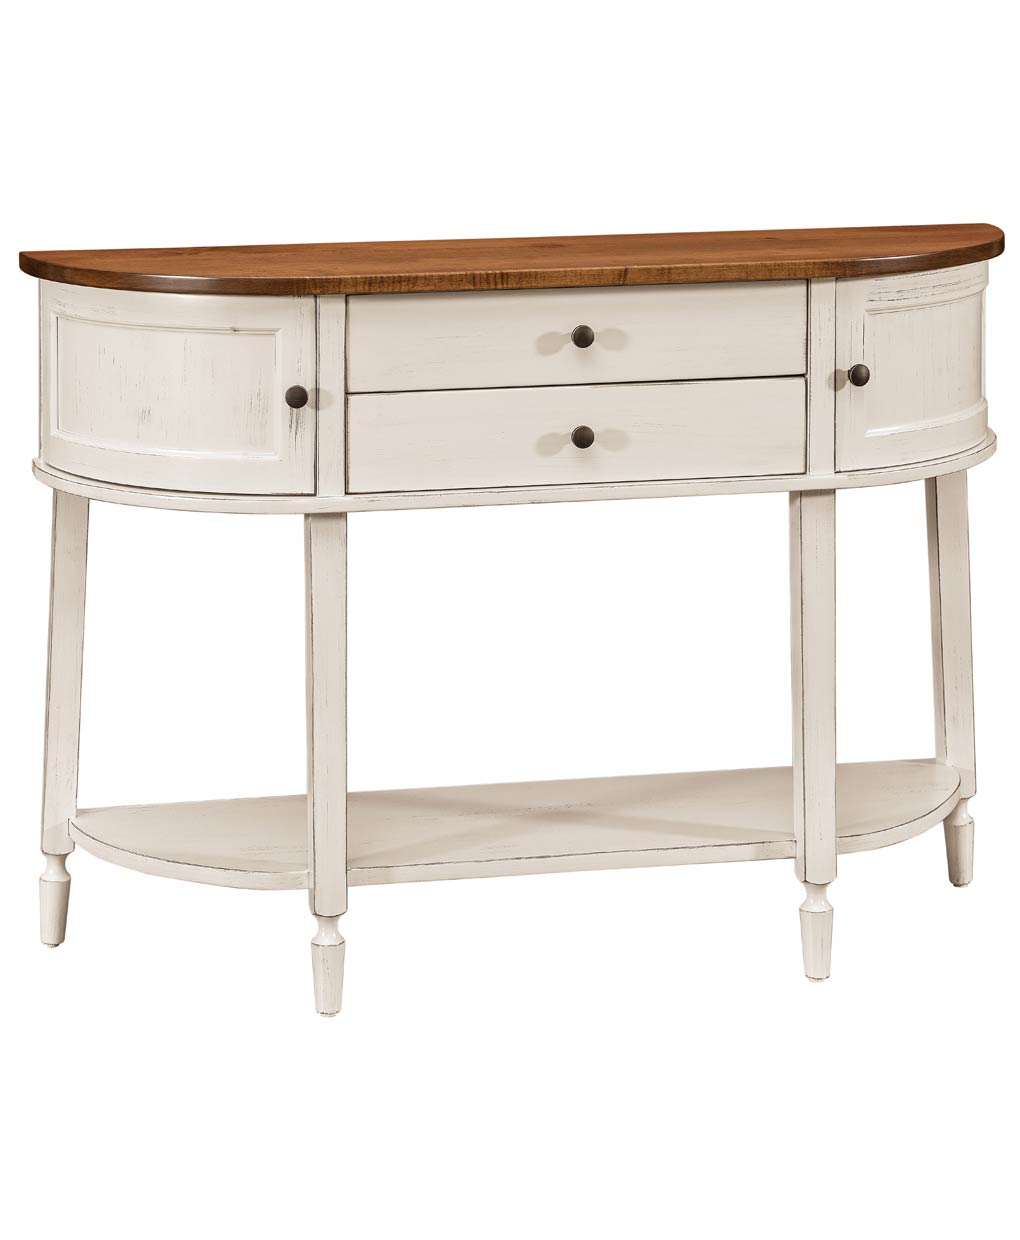 Add the nice warm cozy, farmhouse feel to your home with our Amish made Crayton Server.